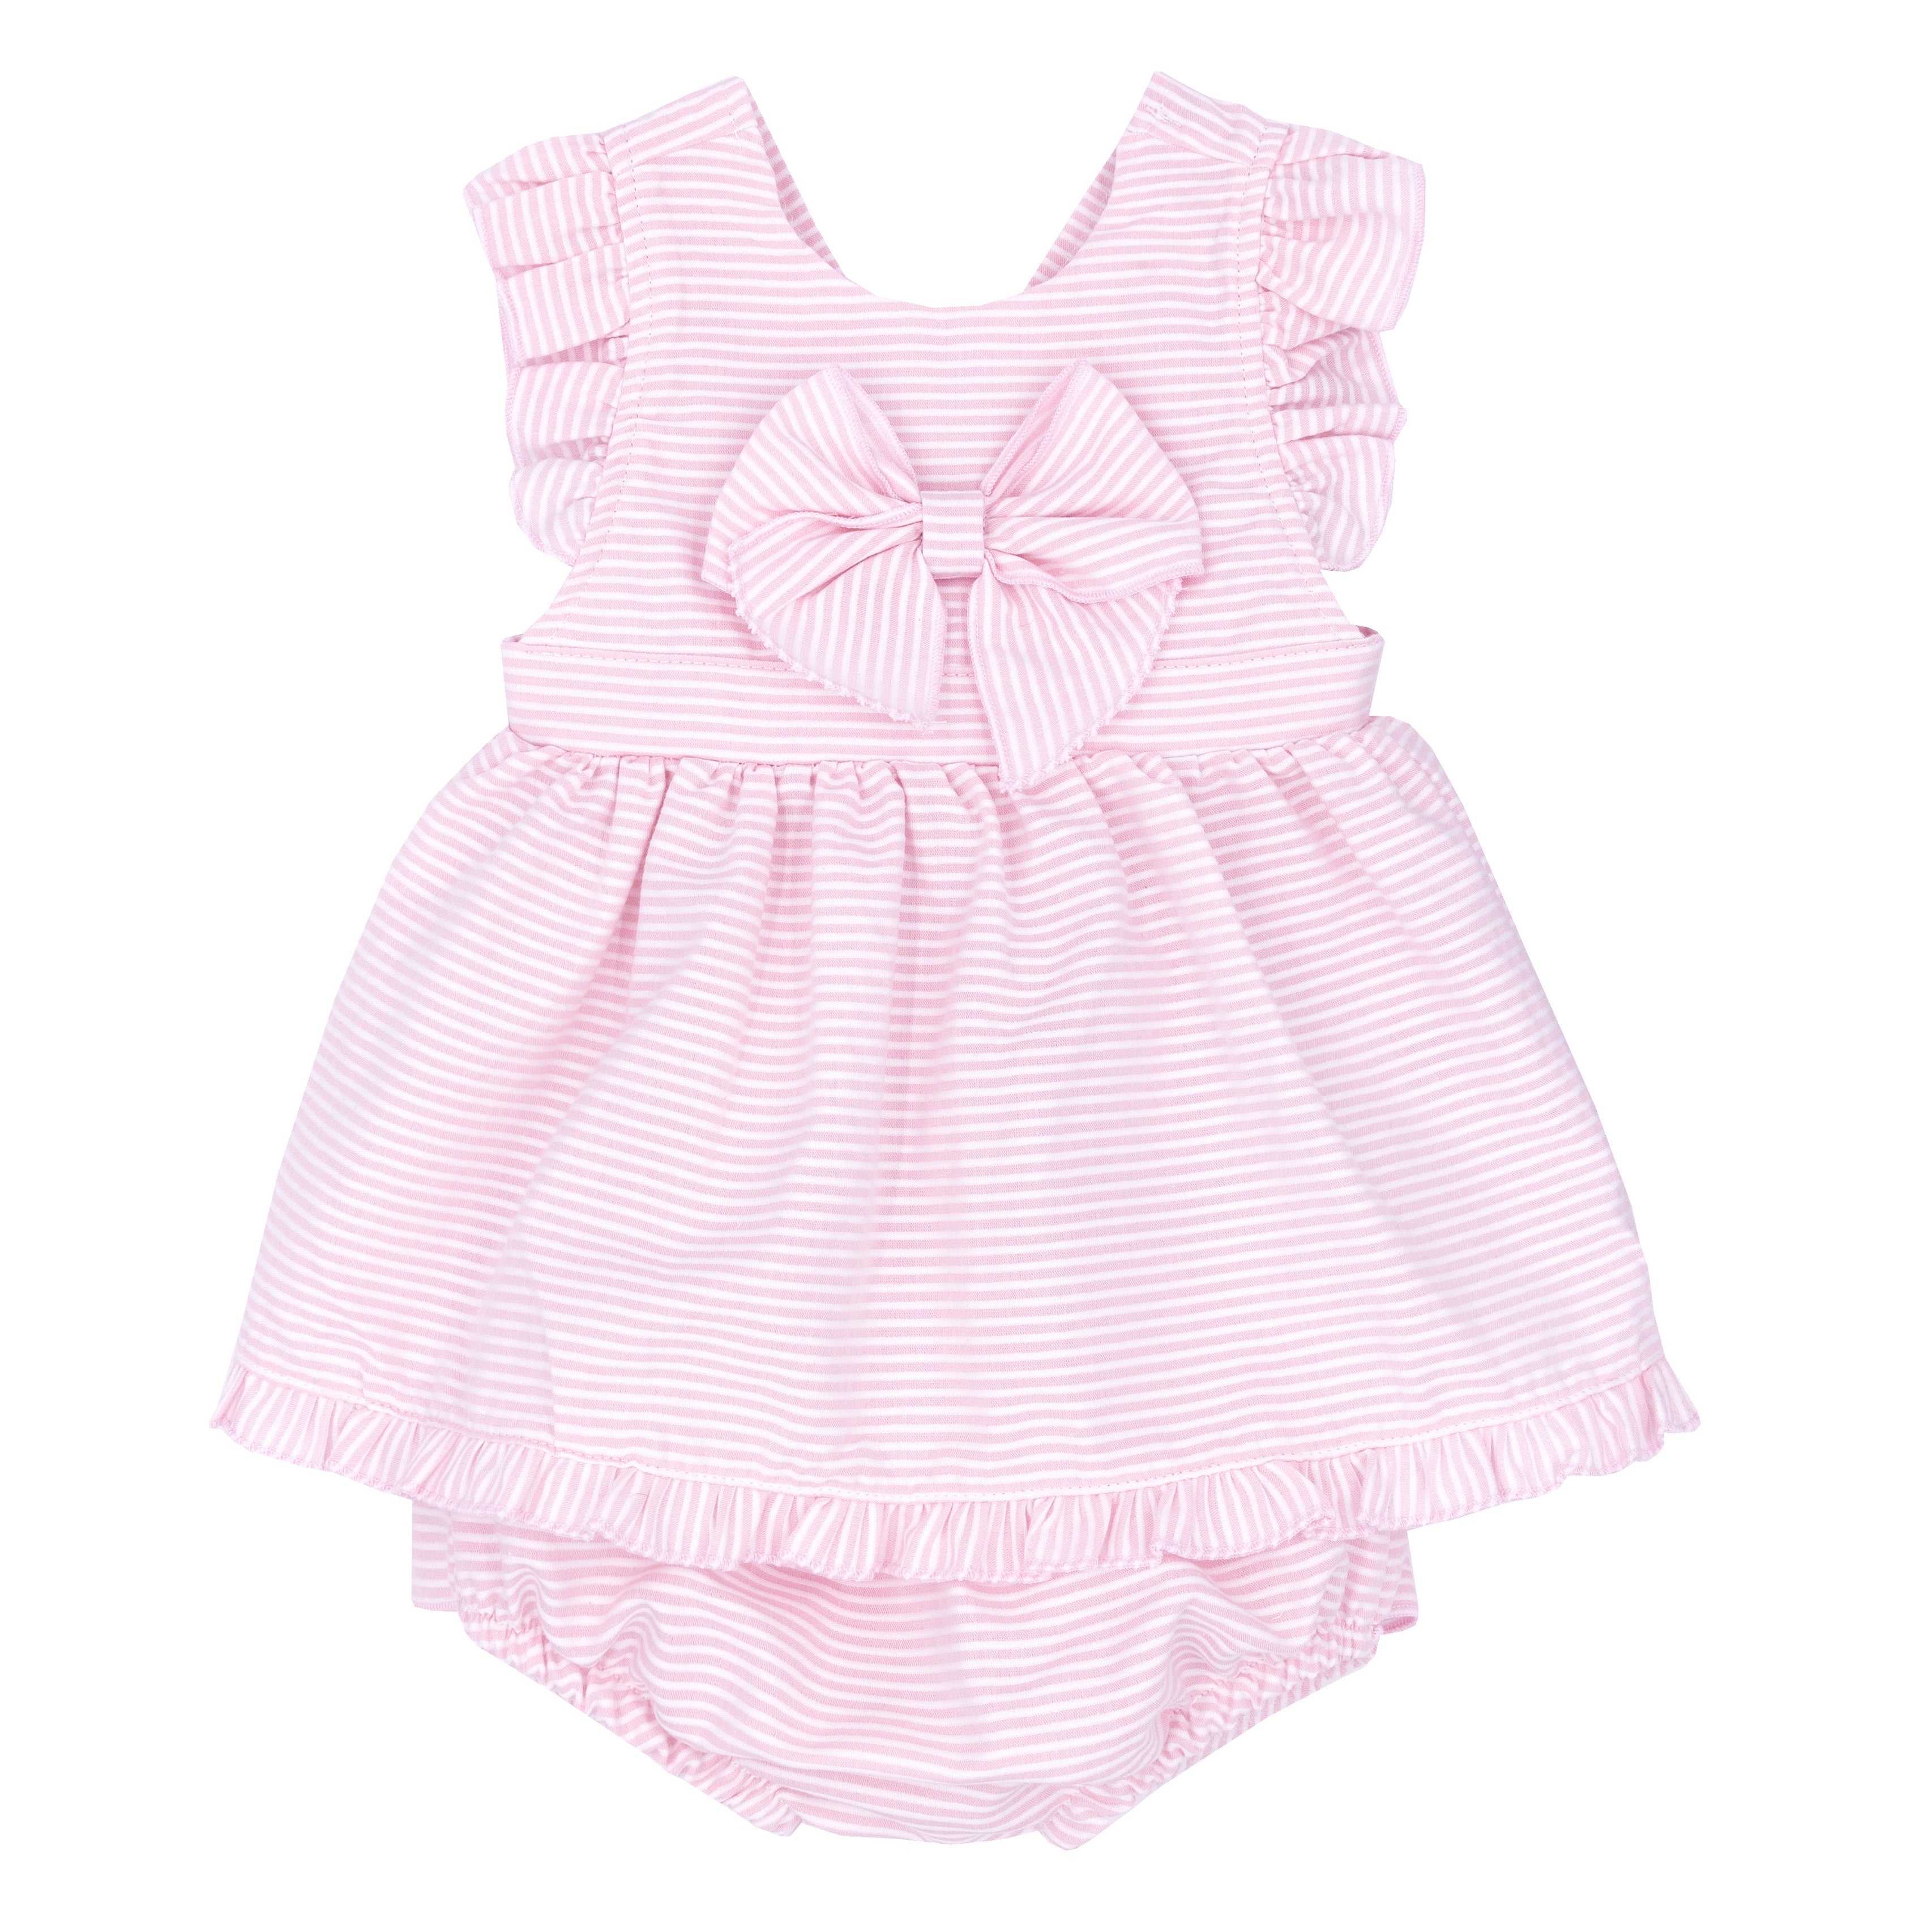 Girls dress and knicker set with bow